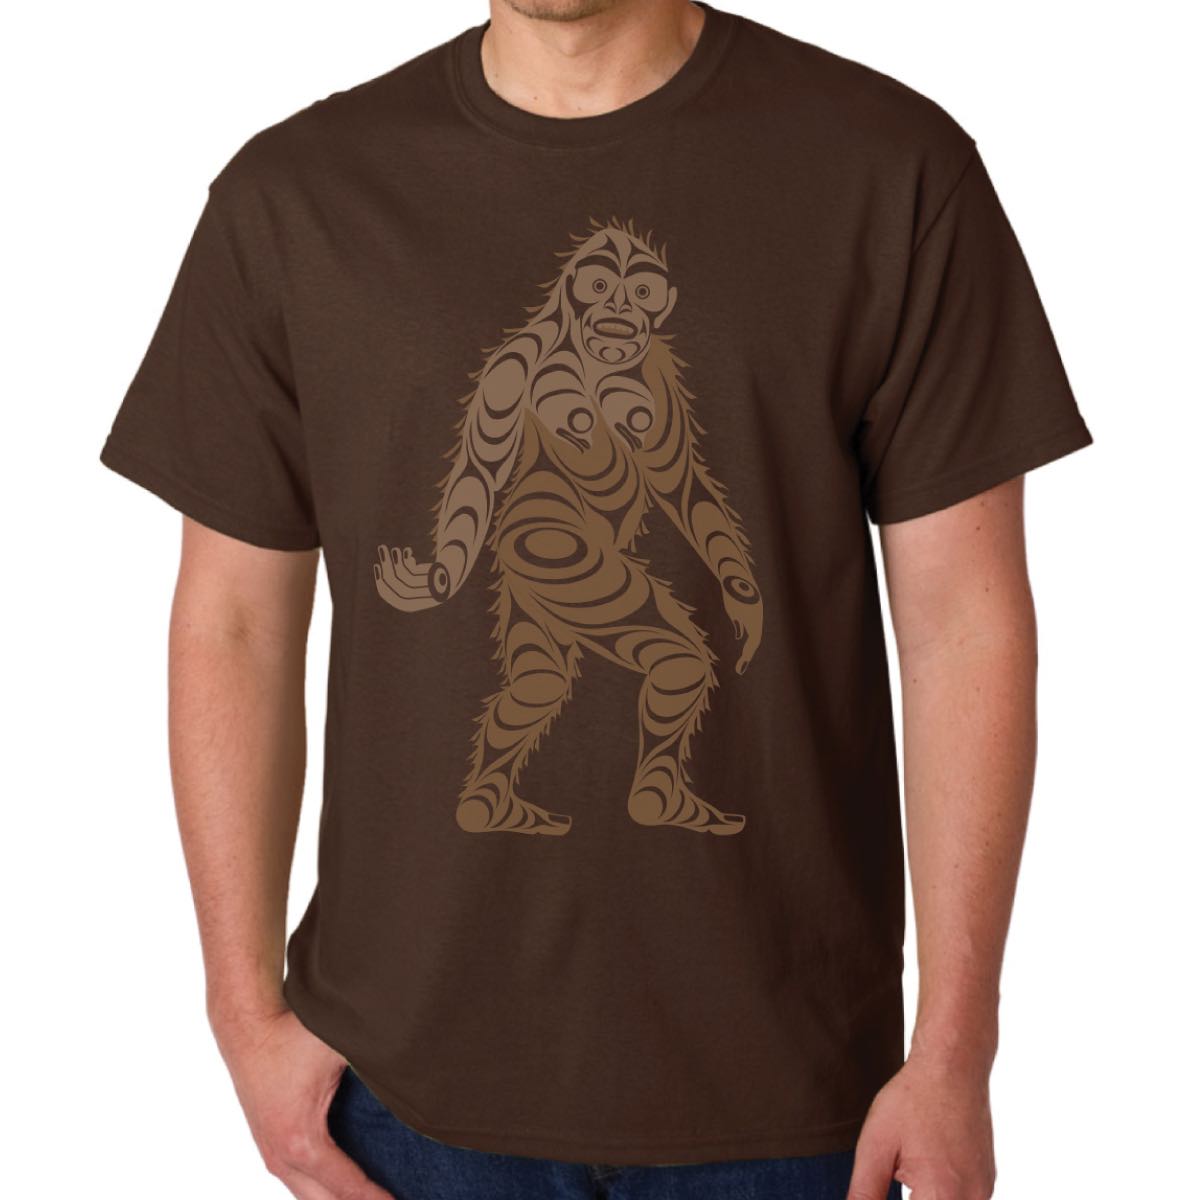 T Shirt Francis Horne Sr Sasquatch - XXL - TSHSXXL - House of Himwitsa Native Art Gallery and Gifts